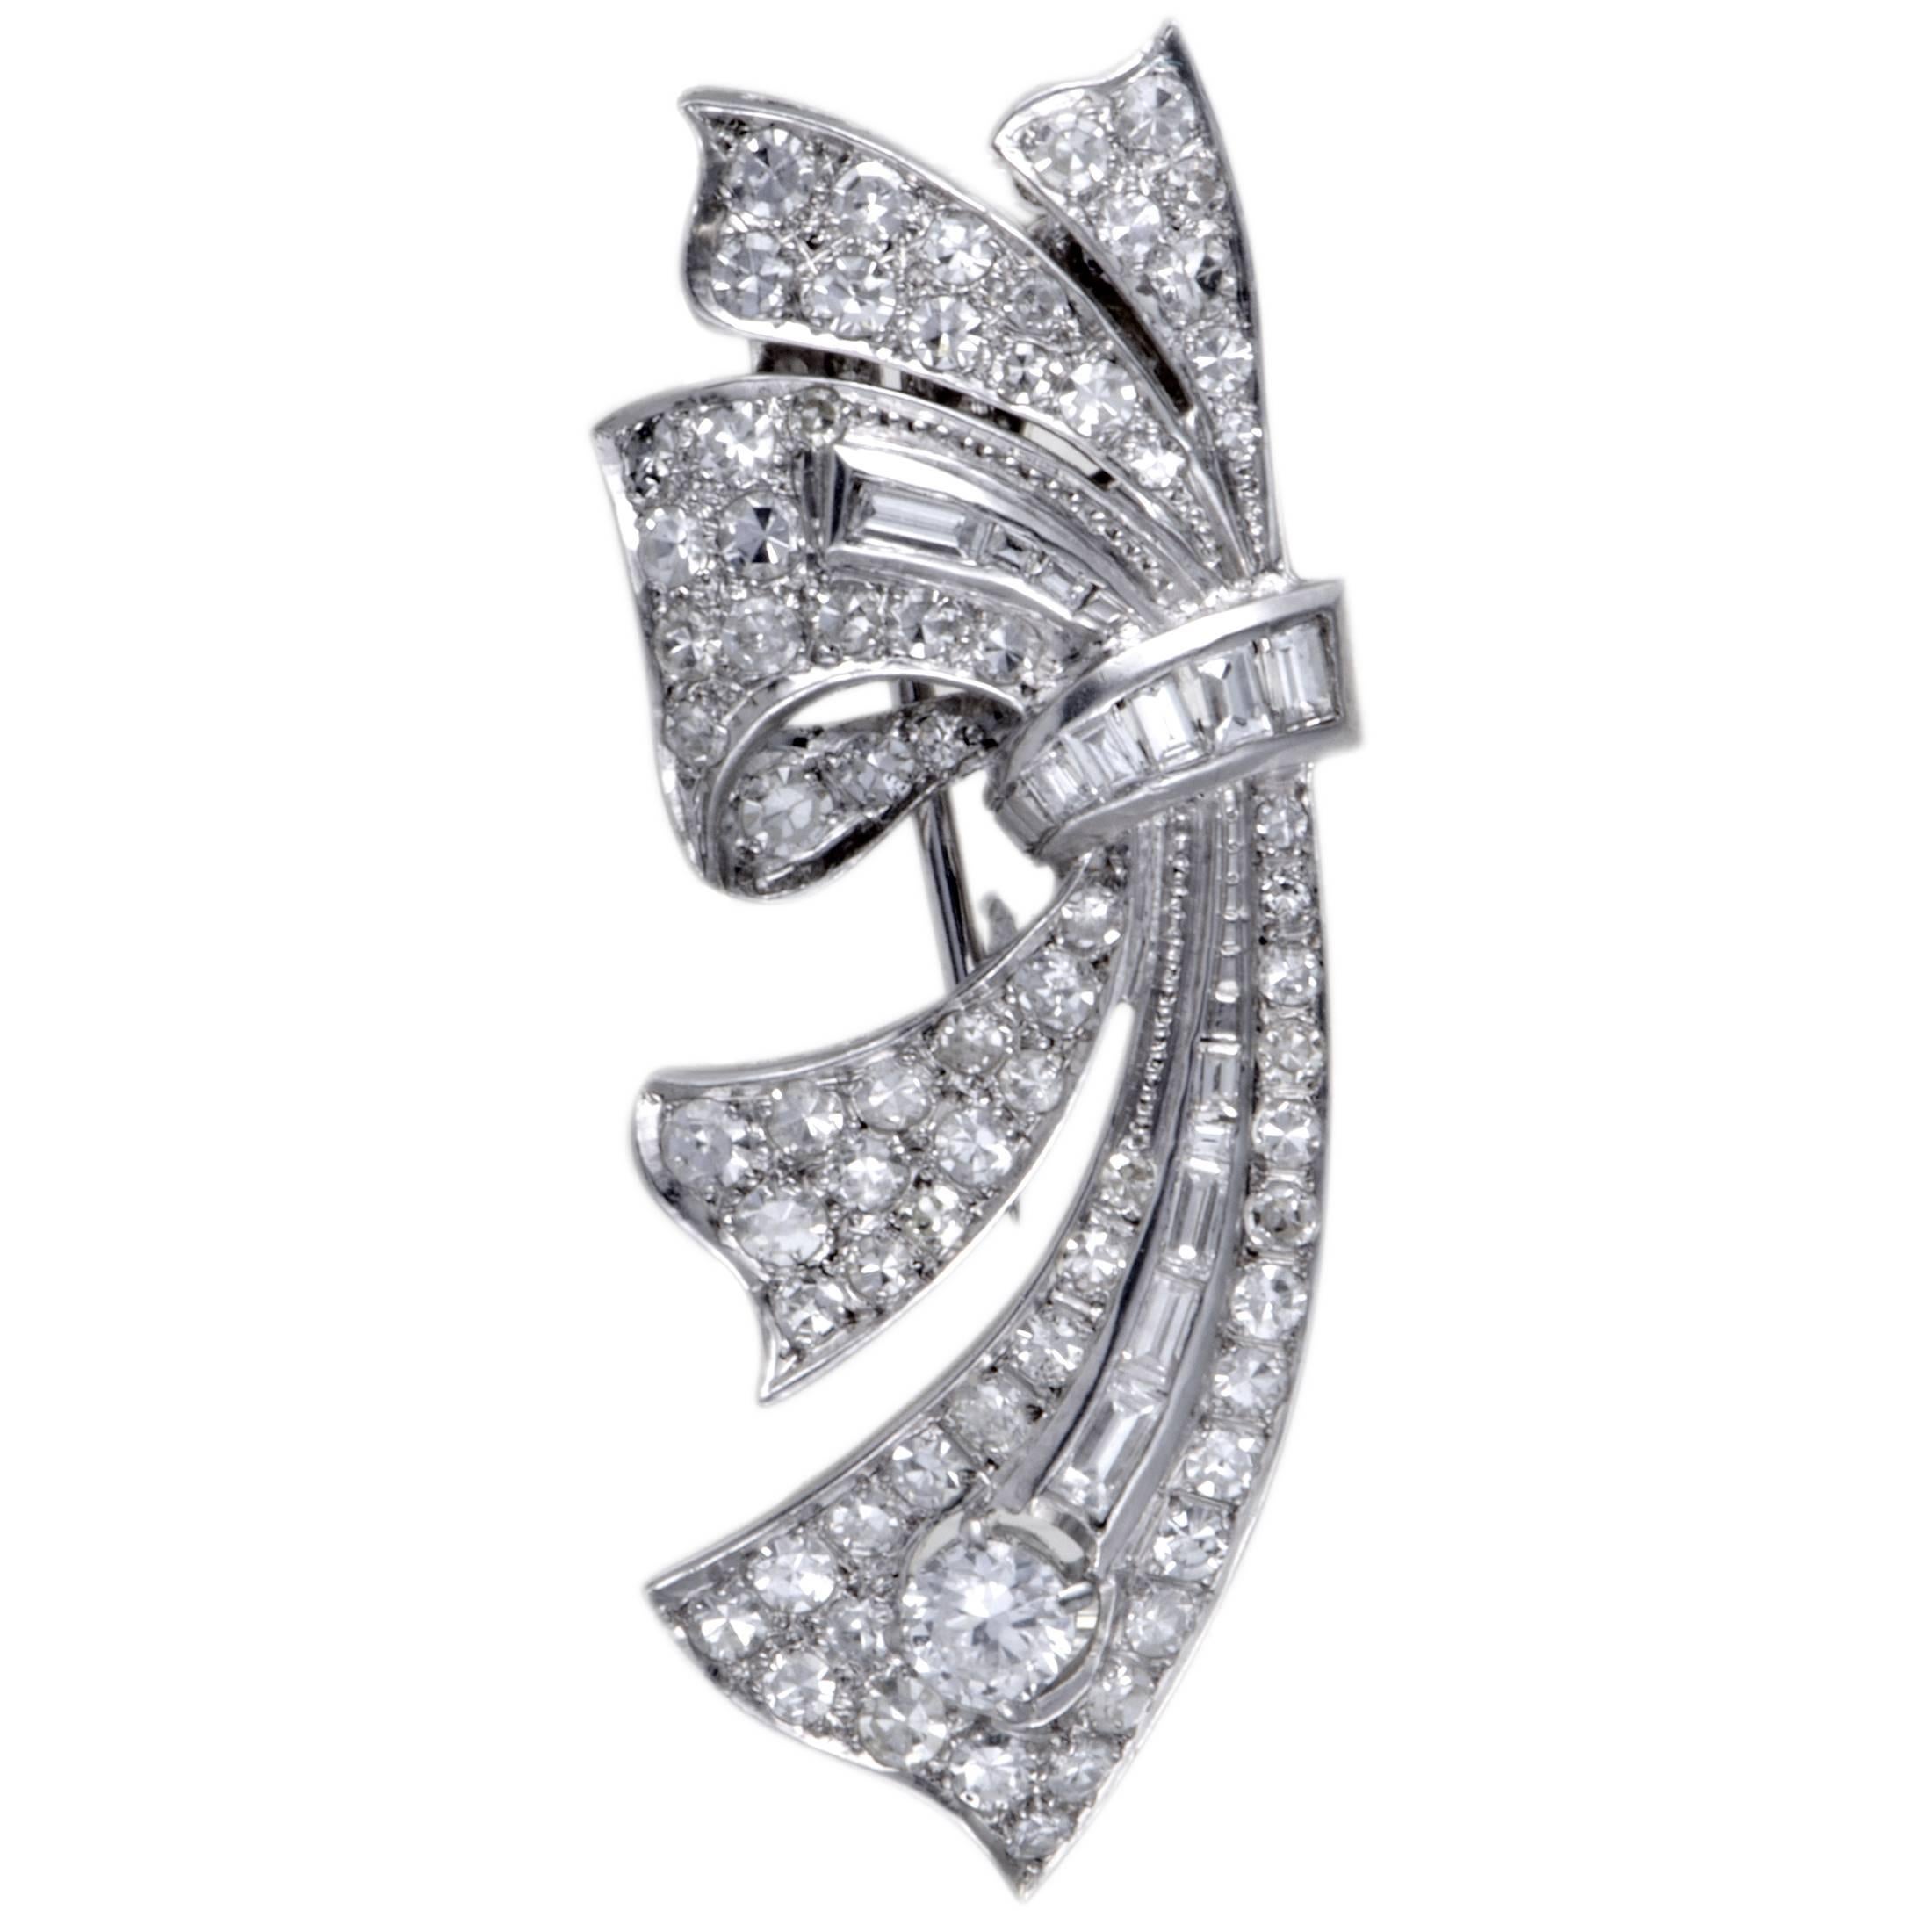 The ever-dazzling combination of prestigious platinum and resplendent diamonds is featured in this extravagant brooch that will catch everybody’s gaze. The brooch boasts an incredibly sophisticated design and it is embellished with a plethora of